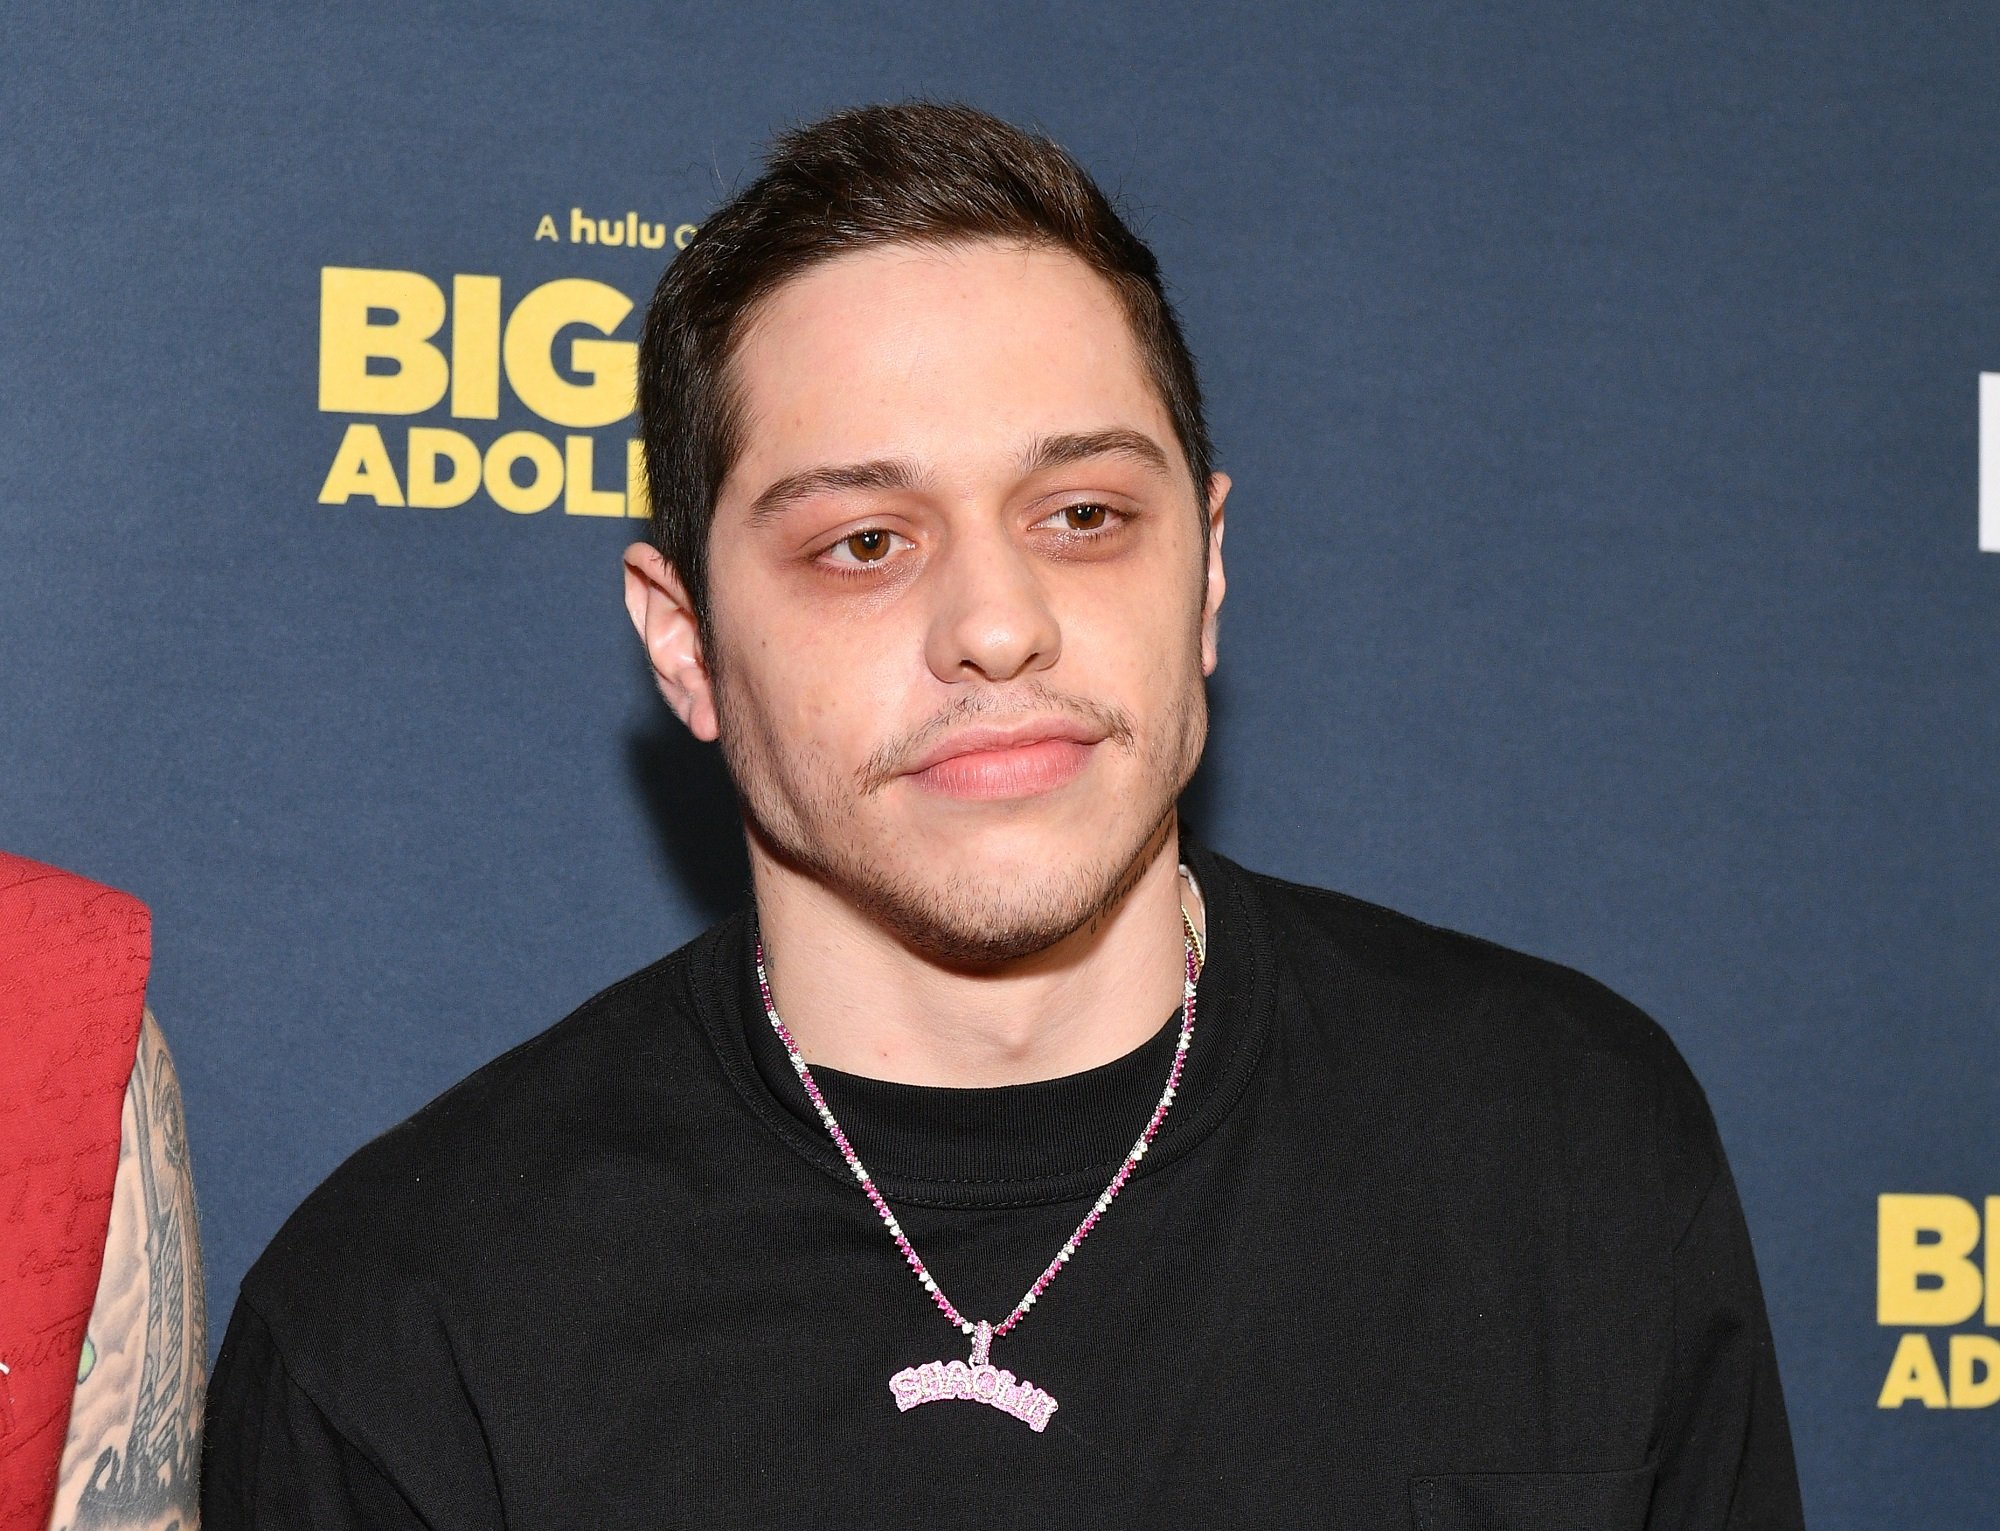 Pete Davidson attends the premiere of 'Big Time Adolescence' in March 2020